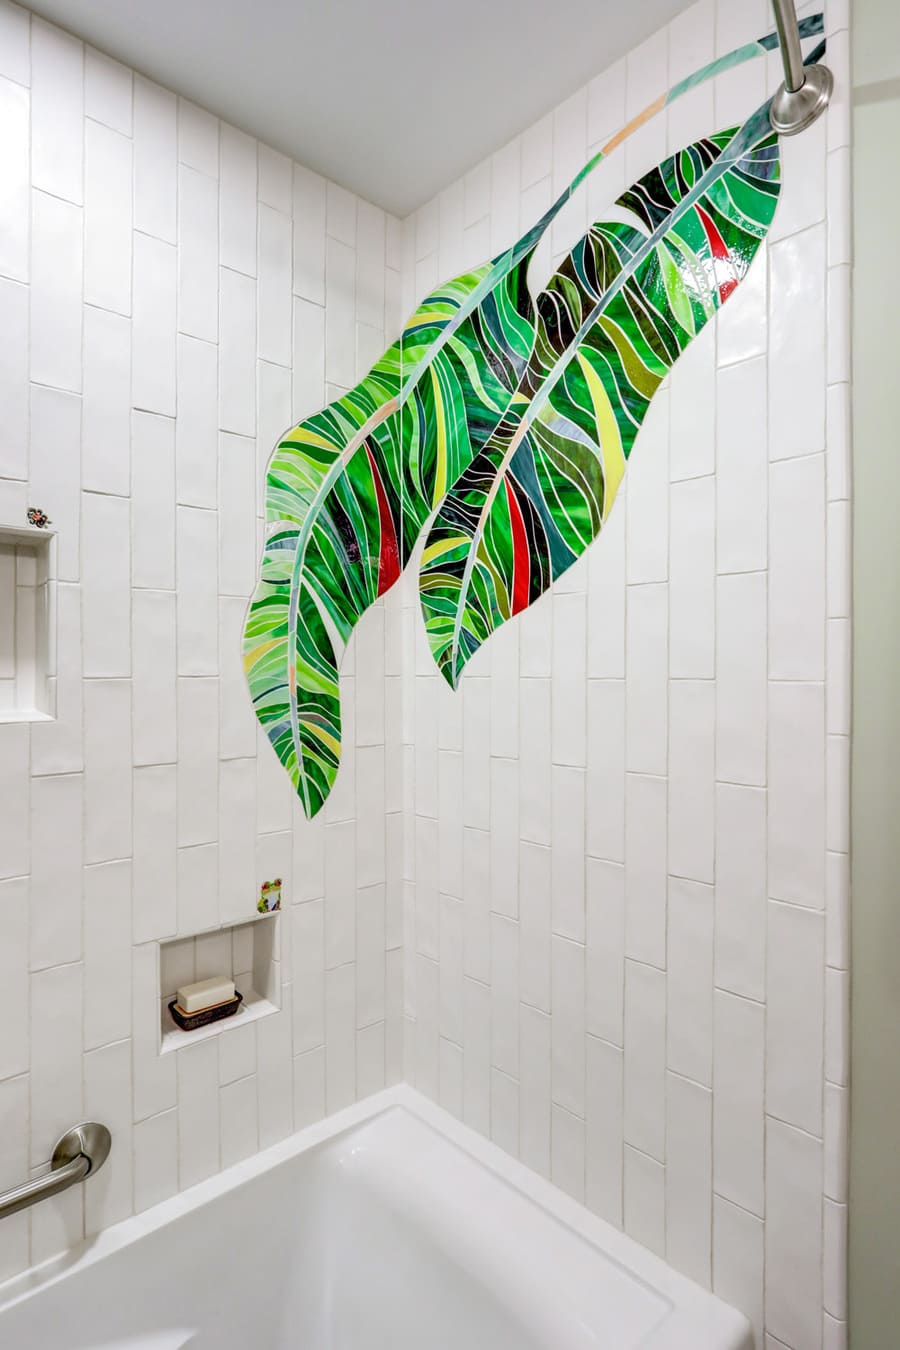 Rohrerstown Bathroom Remodel with mosaic art in shower